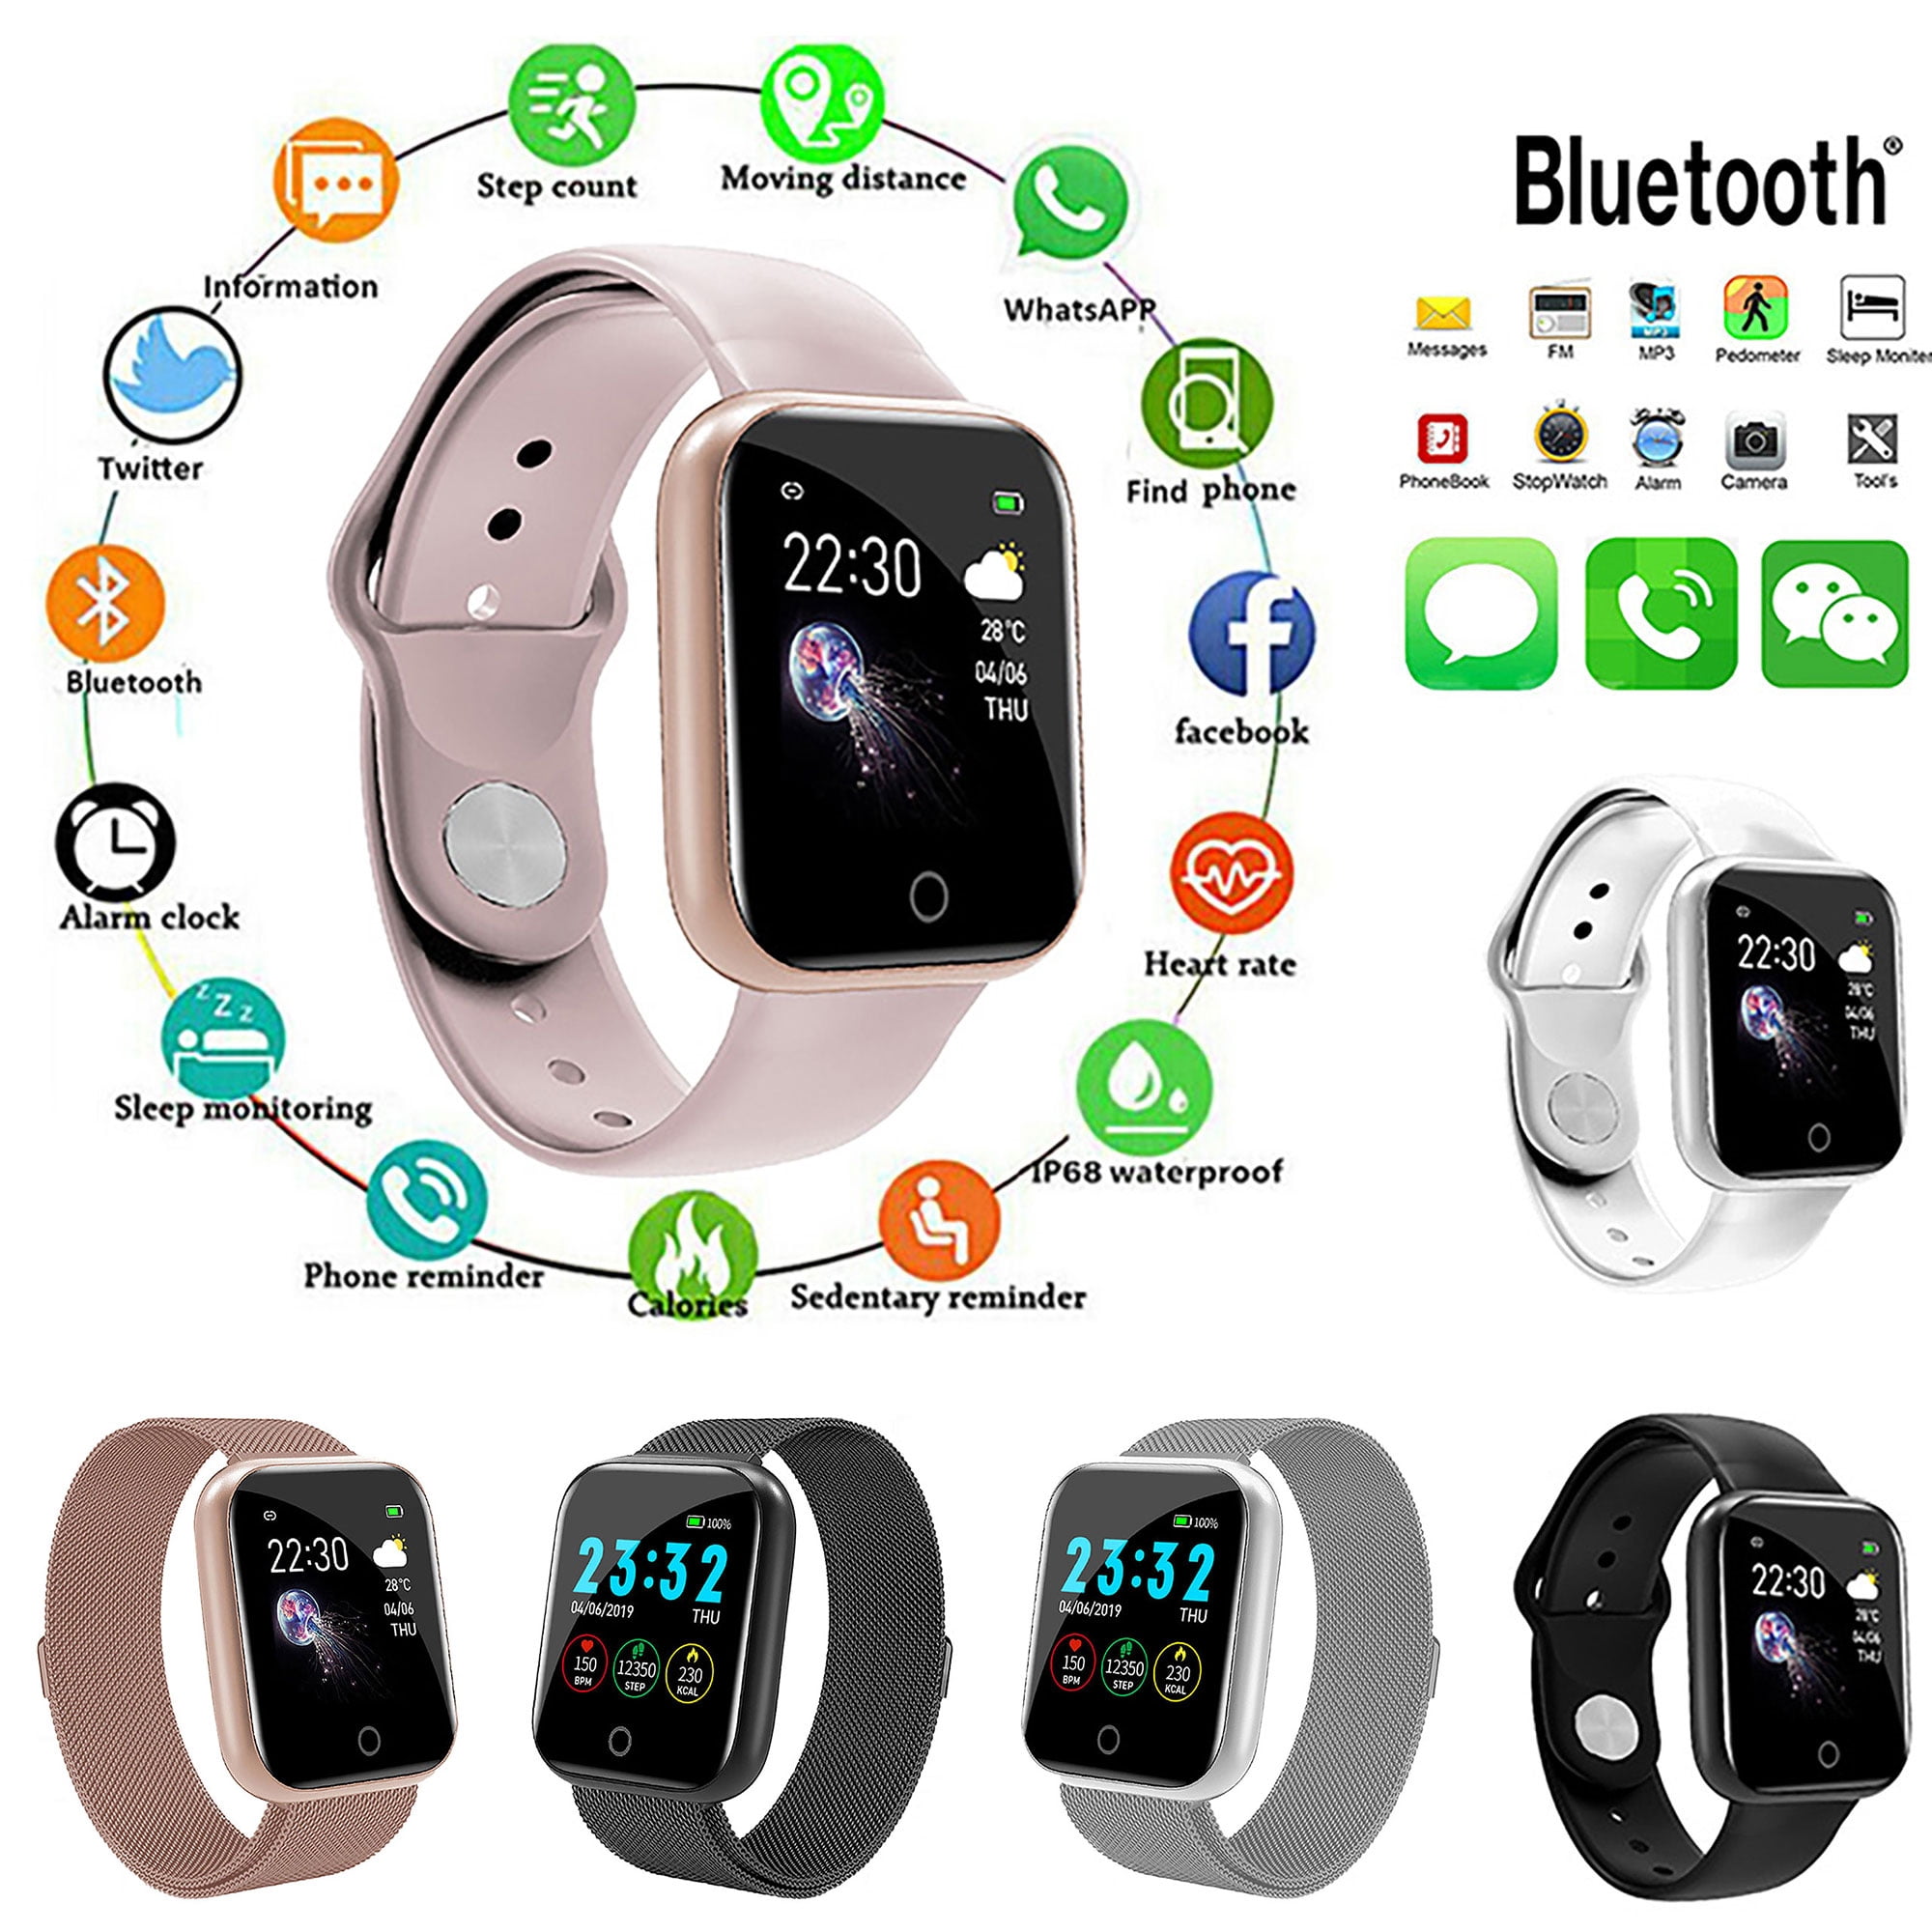 Heart Rate and Blood Pressure Monitoring 50m Water Resistance. Activity Tracker Medication Compliance and Prescription Inventories Tracking Cling Leap Smartwatch Multisport Built-in GPS 